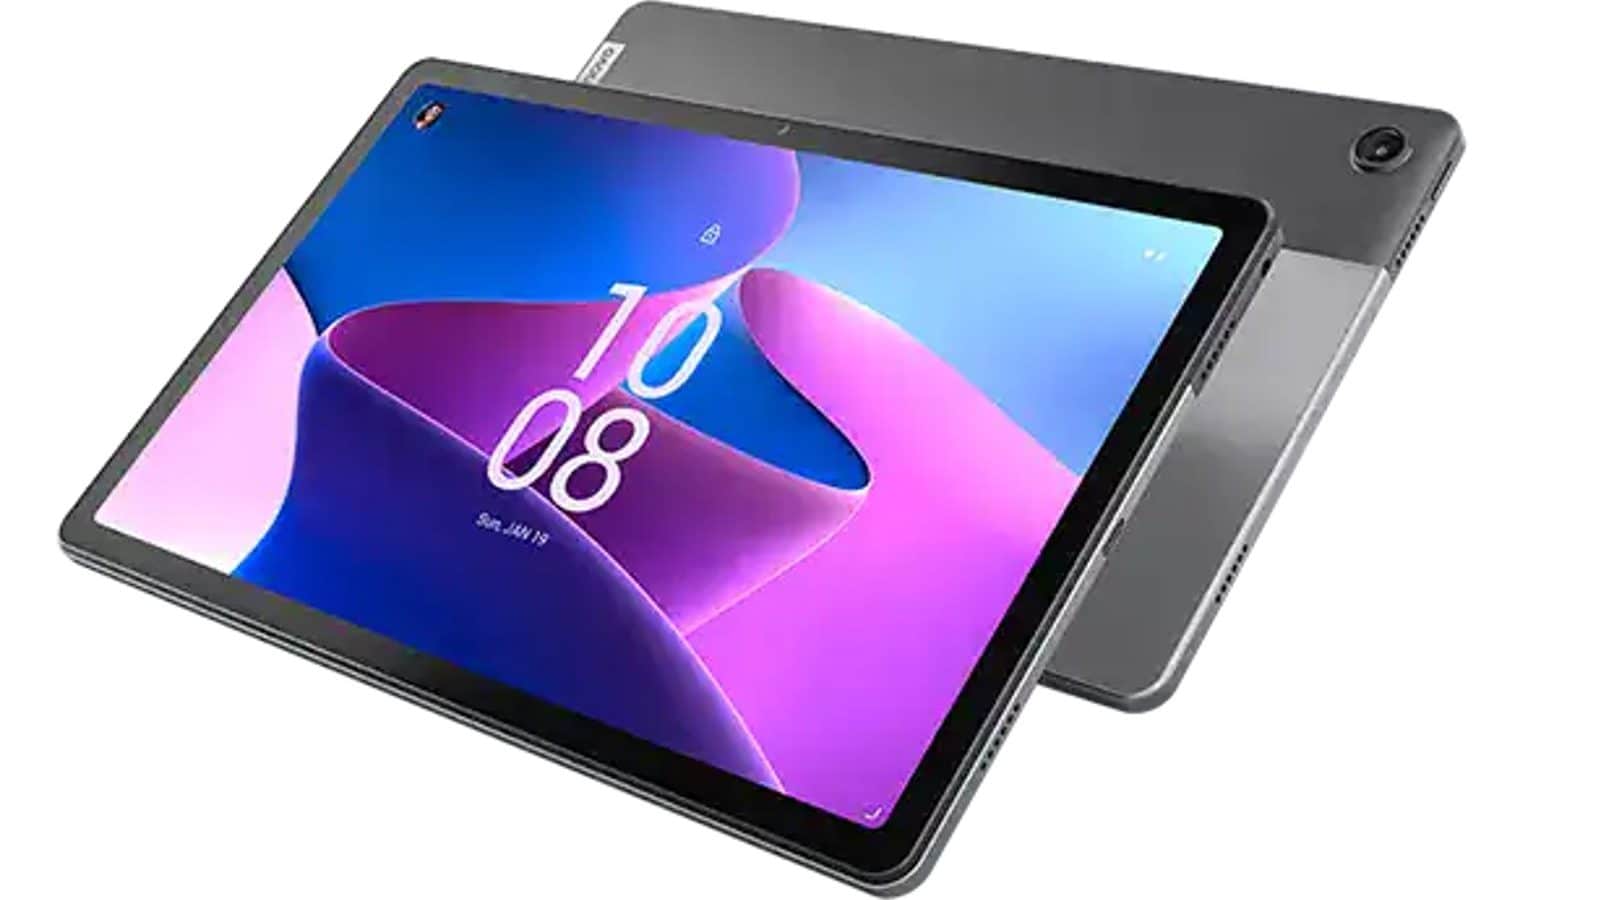 lenovo-m10-plus-3rd-gen-android-tablet-launched-in-india-price